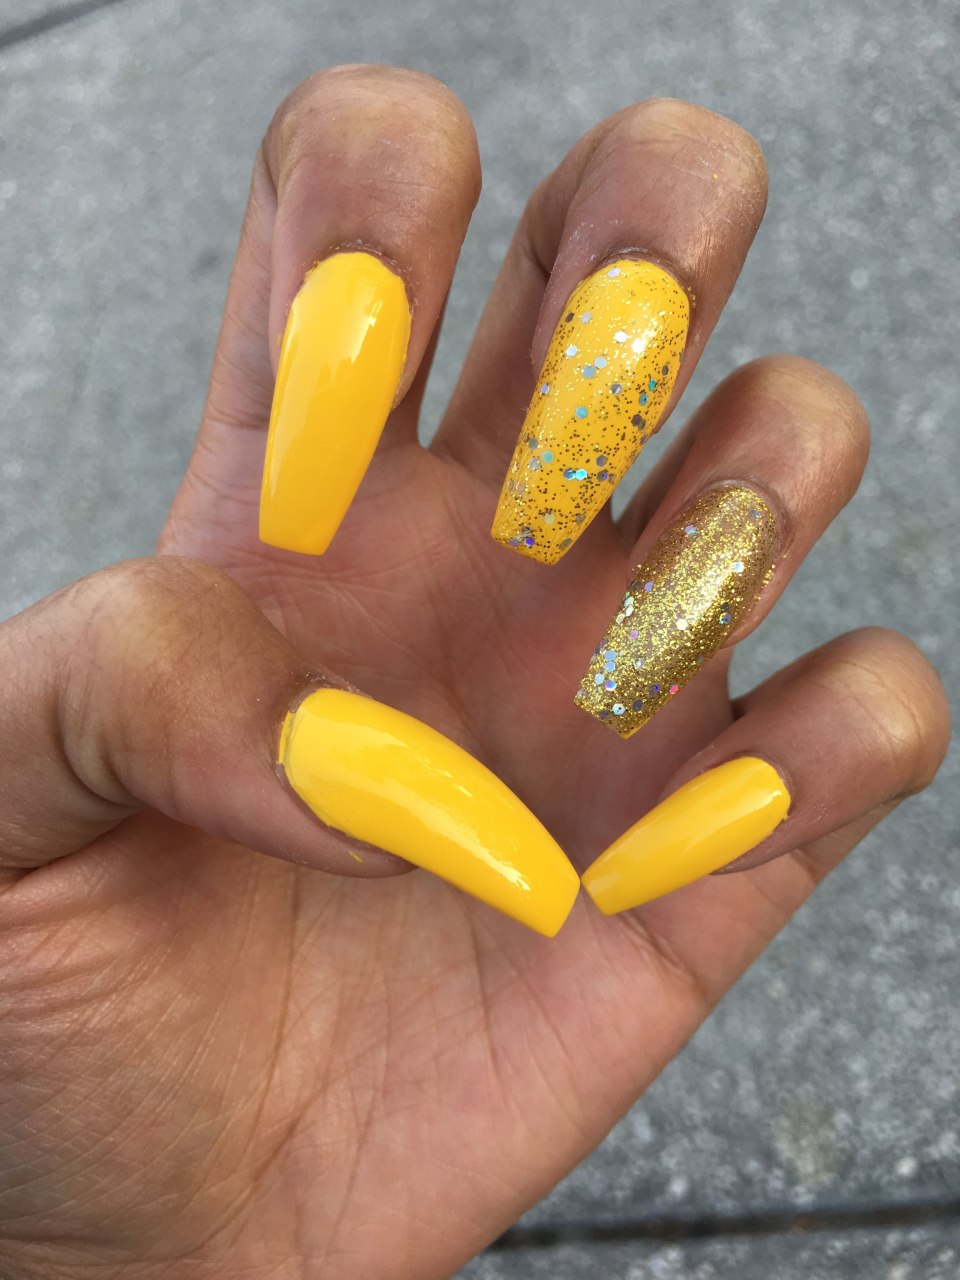 Vibrant Yellow 2 70+ Most Popular Gel Nail Colors - 19